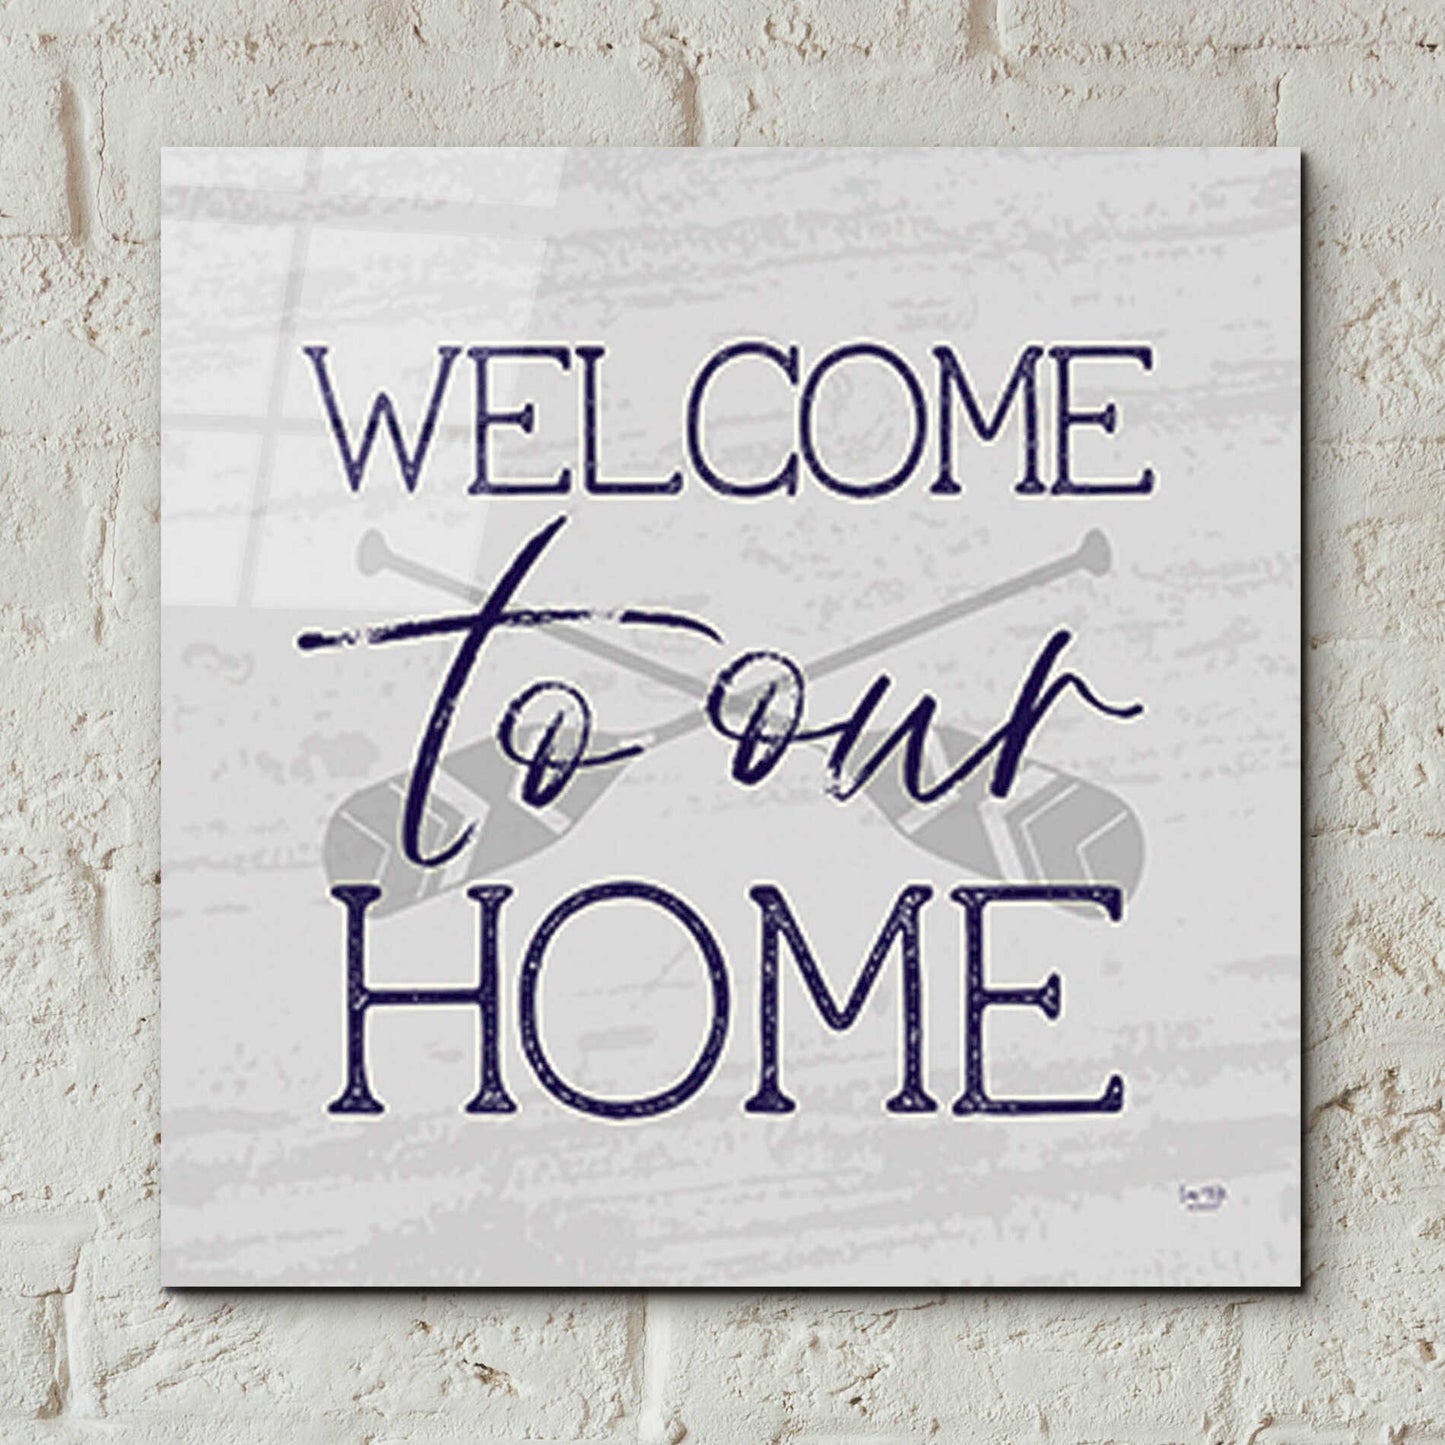 Epic Art 'Lake Welcome to Our Home' by Lux + Me Designs, Acrylic Glass Wall Art,12x12